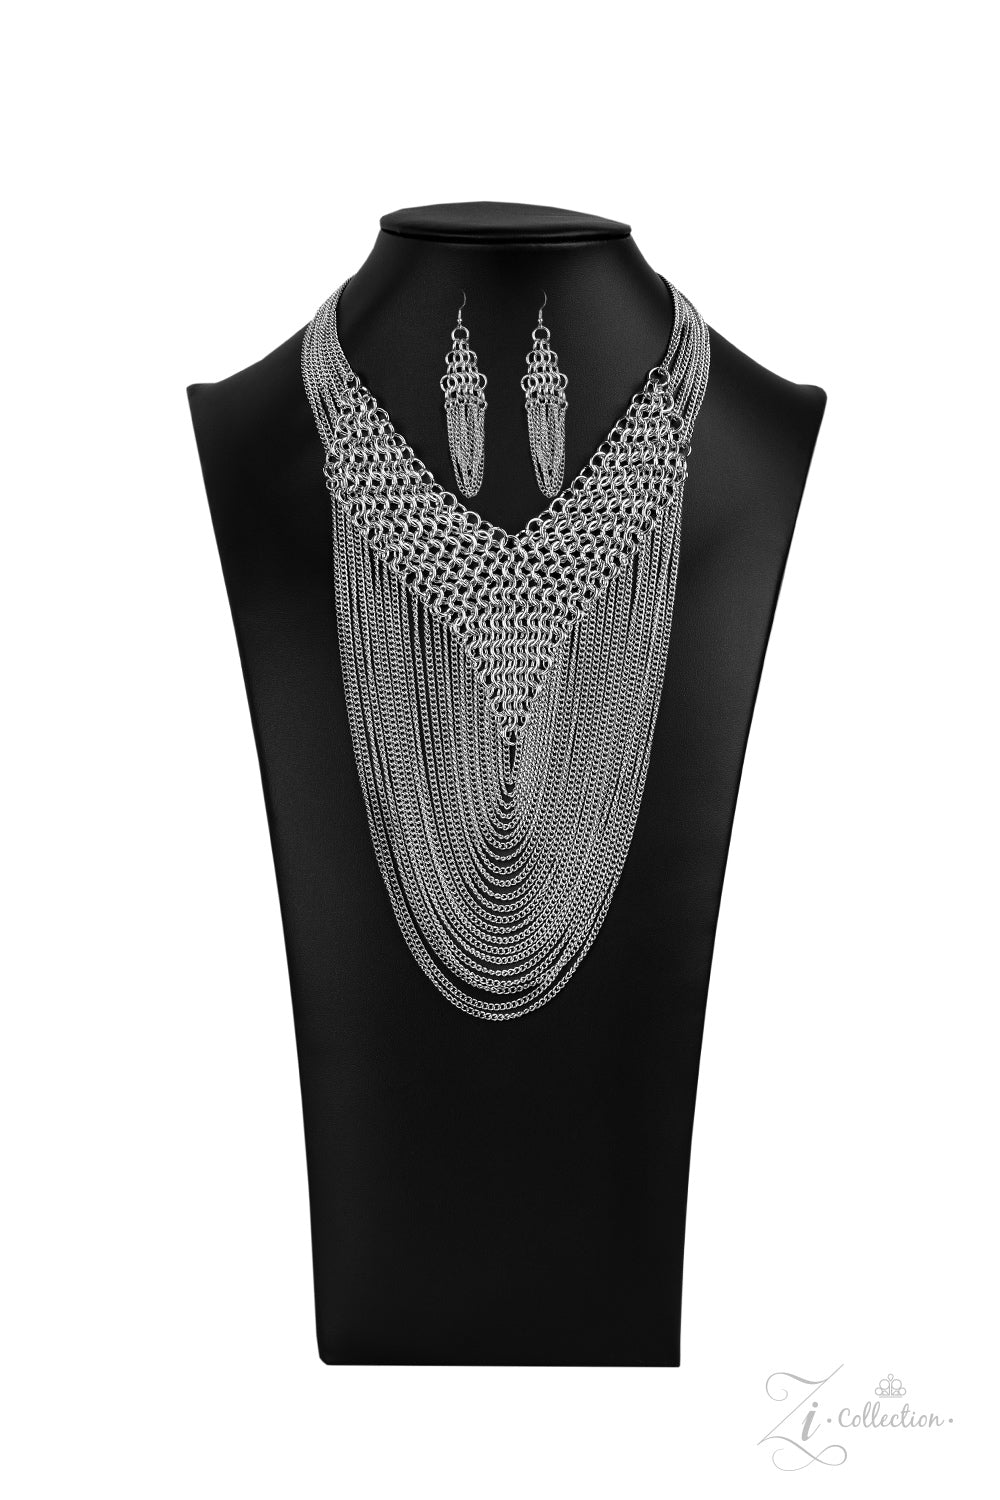 Zi Collection necklace, a thickly layered chains, a rebellious mesh of silver links connect into an edgy V-shaped net.